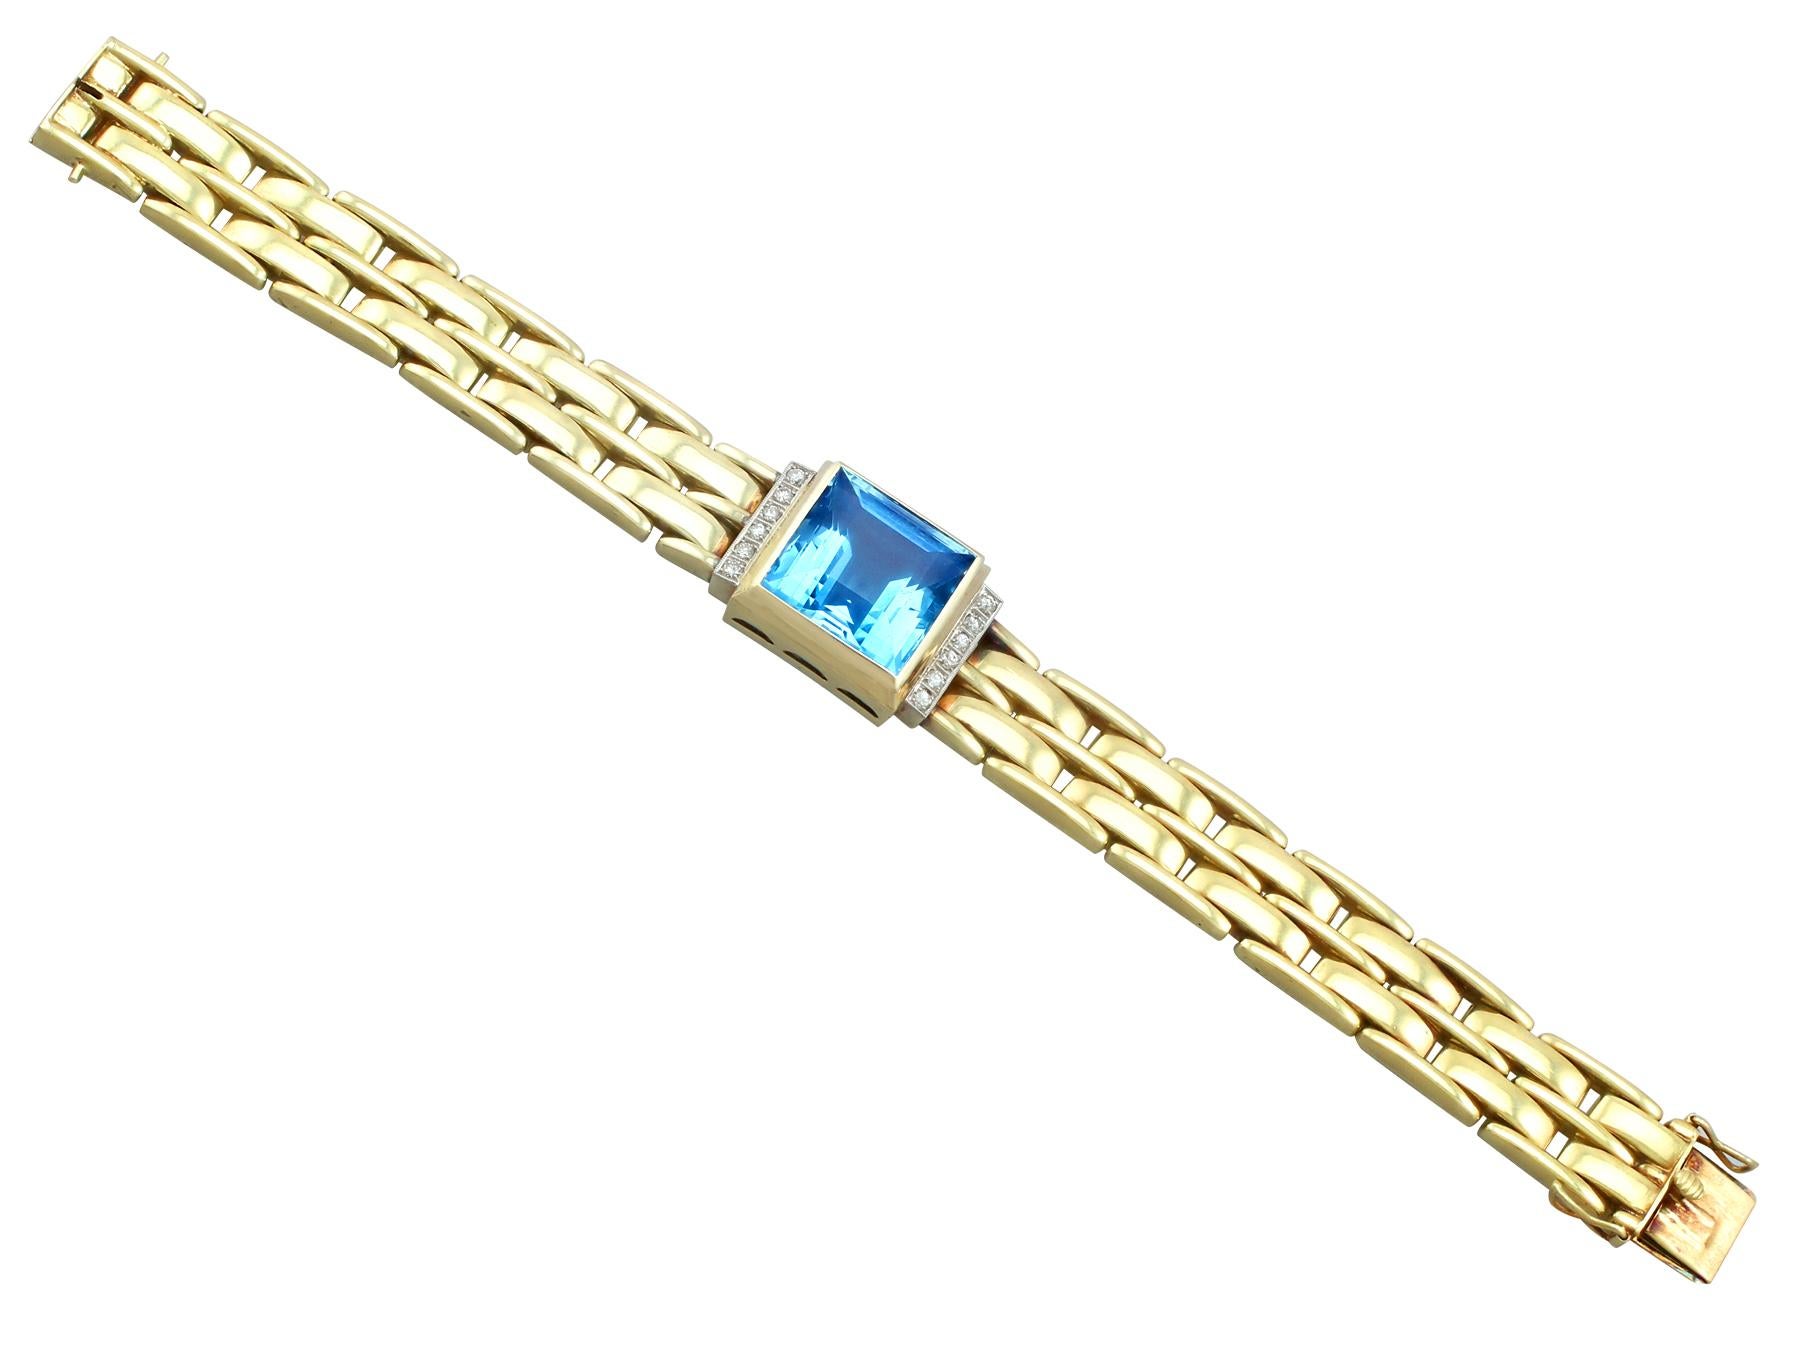 1960s Art Deco Style 21.68 Carat Aquamarine and Diamond Yellow Gold Bracelet In Excellent Condition For Sale In Jesmond, Newcastle Upon Tyne